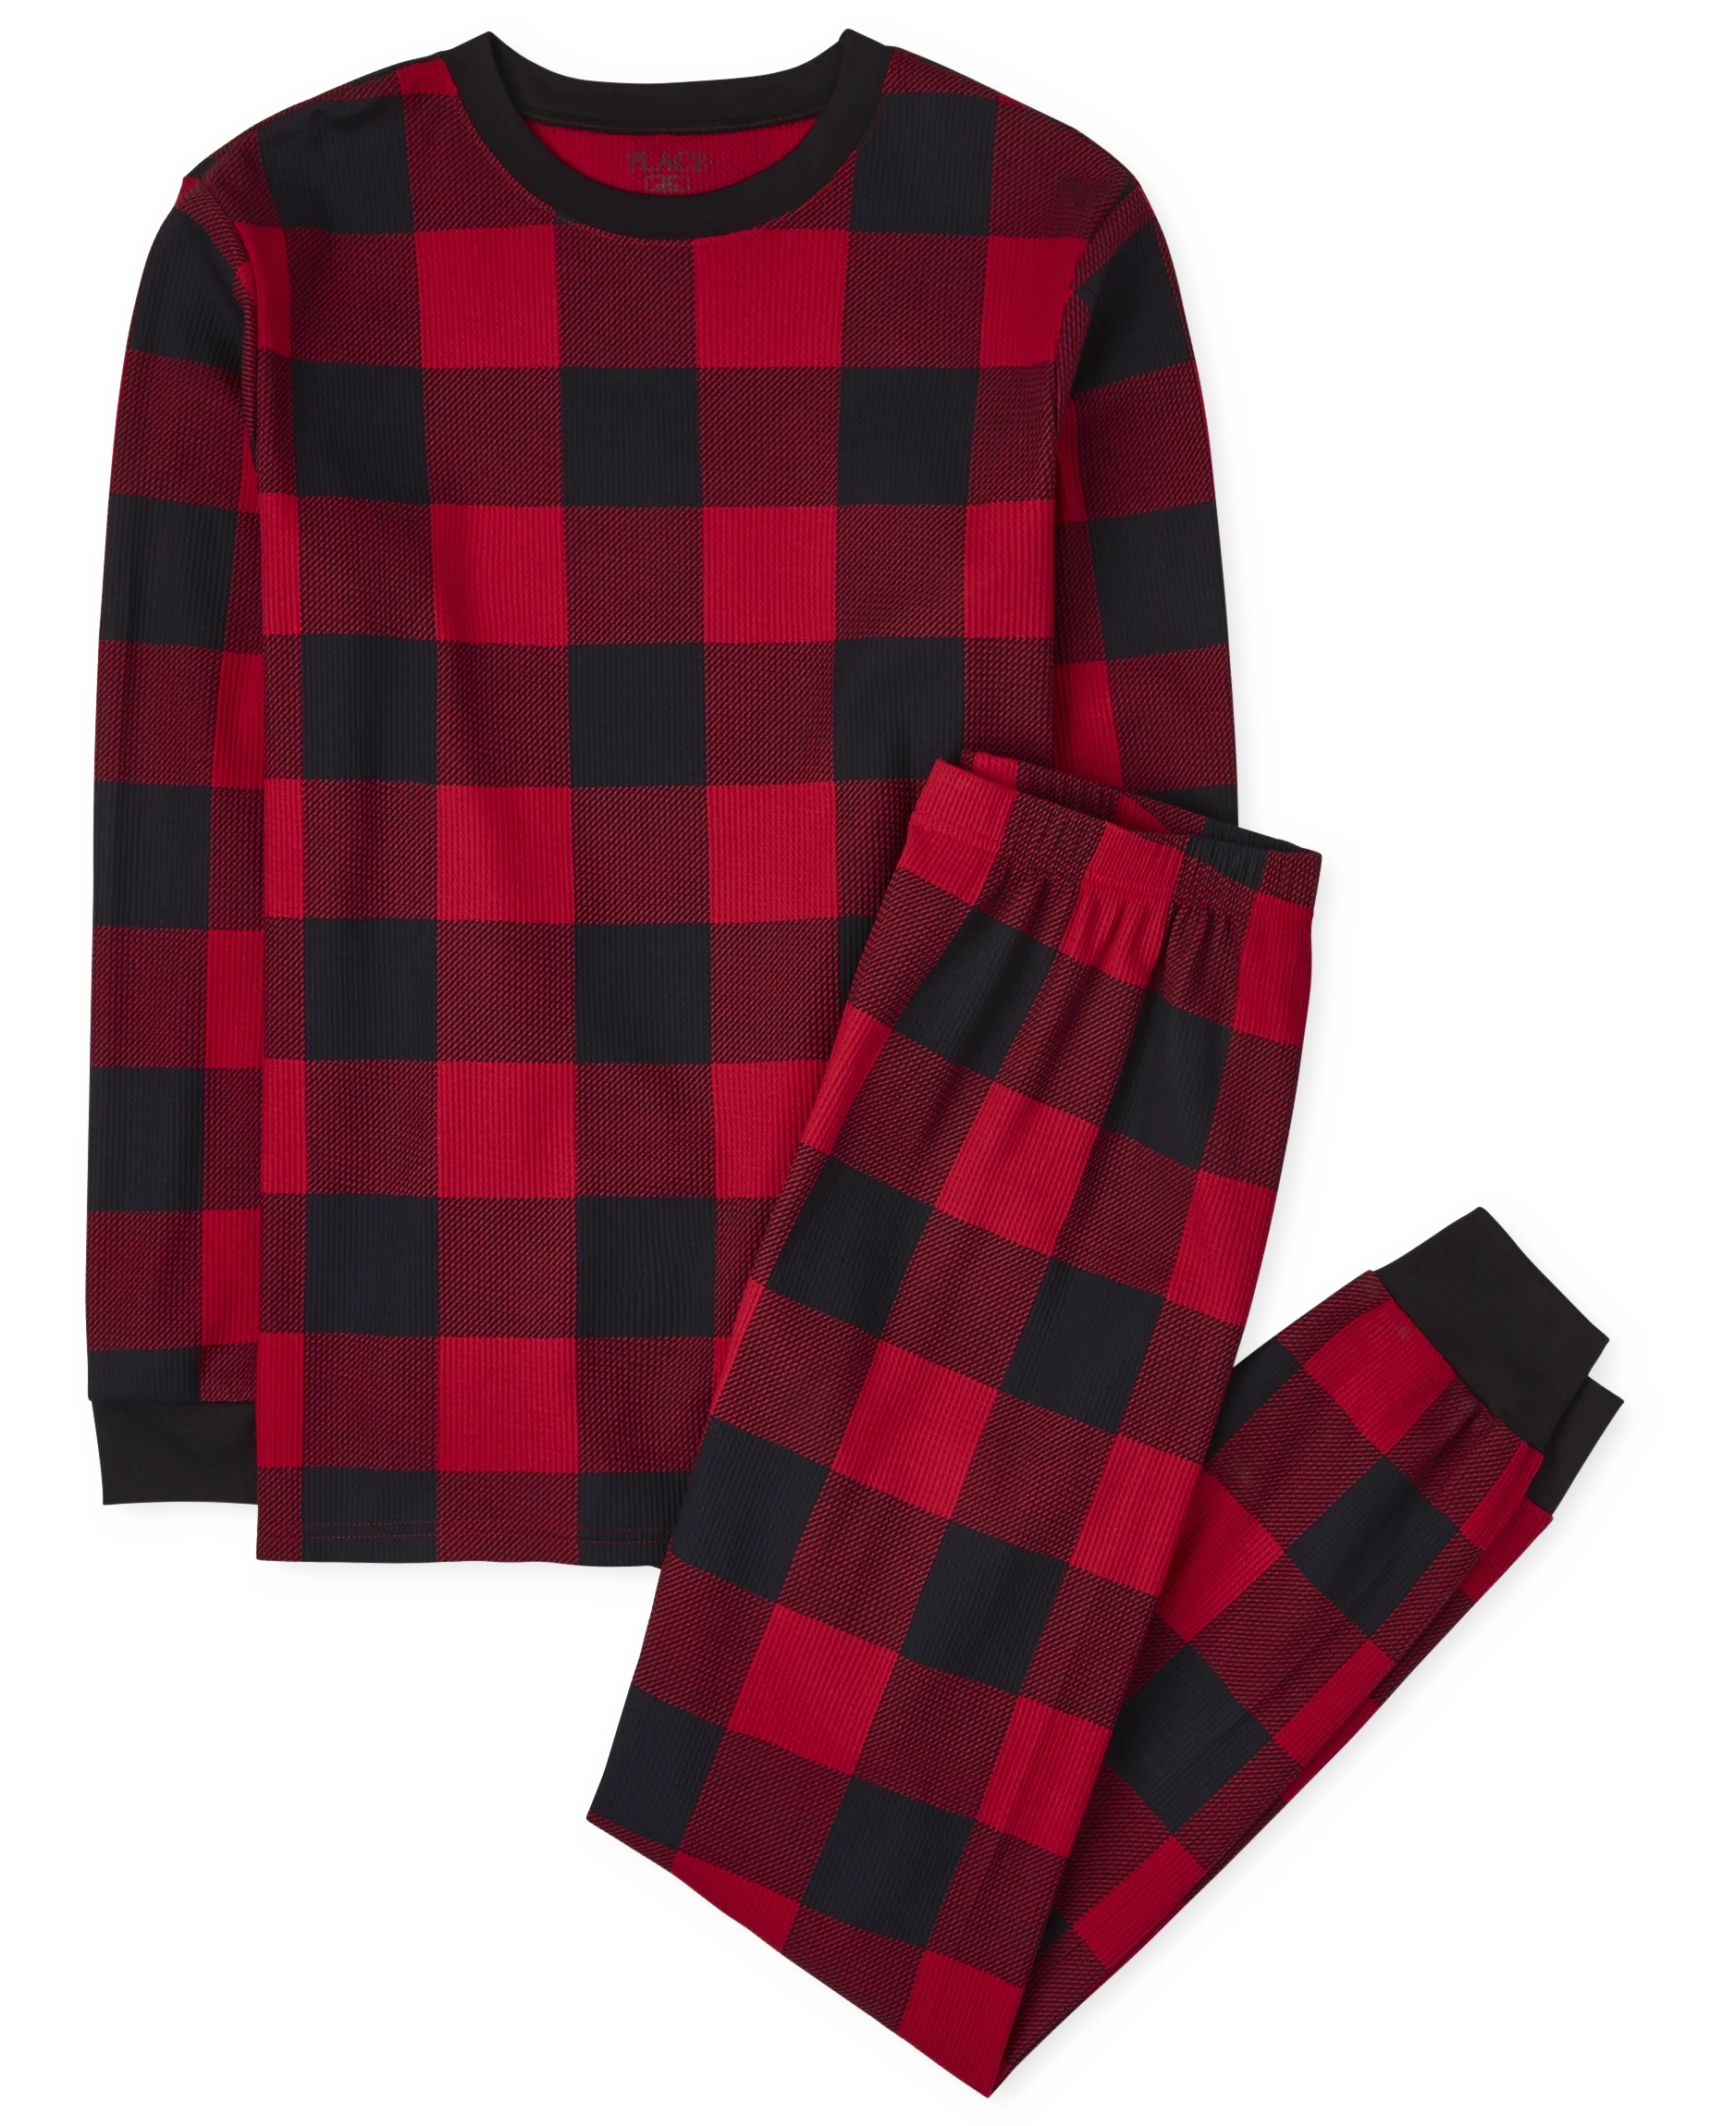 Unisex Adult Matching Family Thermal Buffalo Plaid Cotton Pajamas - ruby | The Children's Place